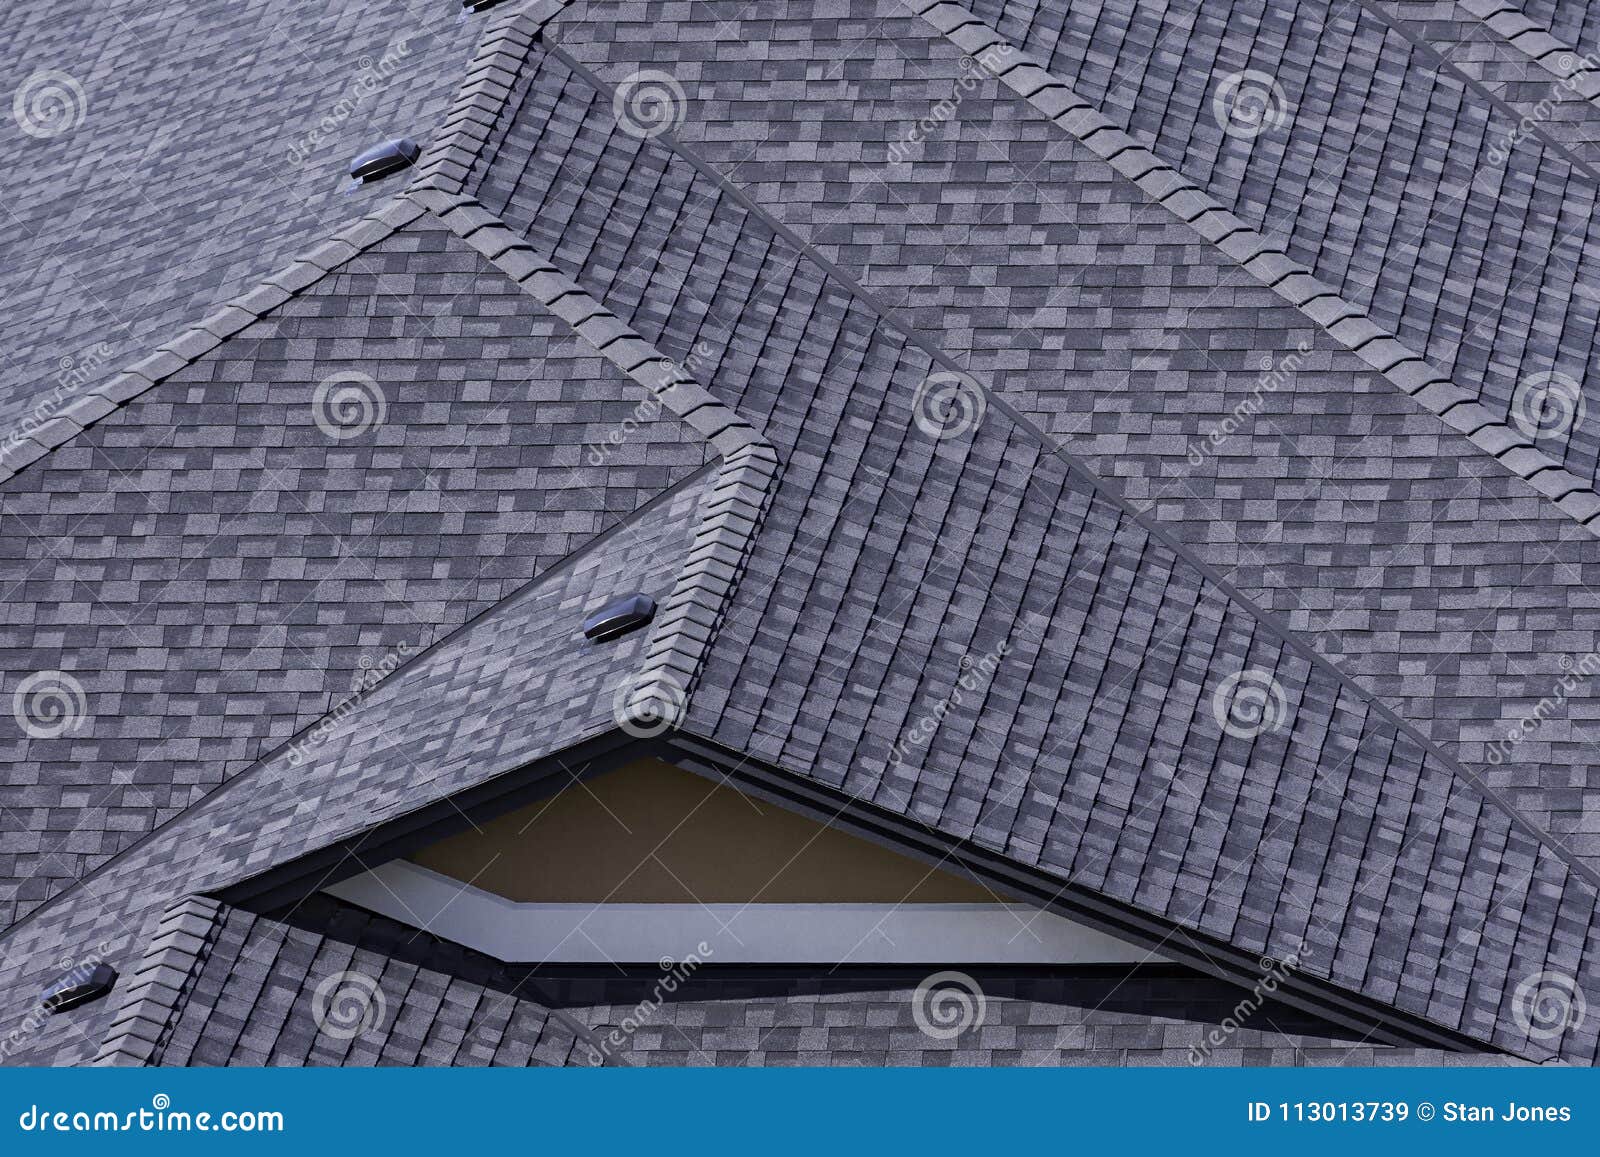 rooftop in a newly constructed subdivision in kelowna british columbia canada showing asphalt shingles